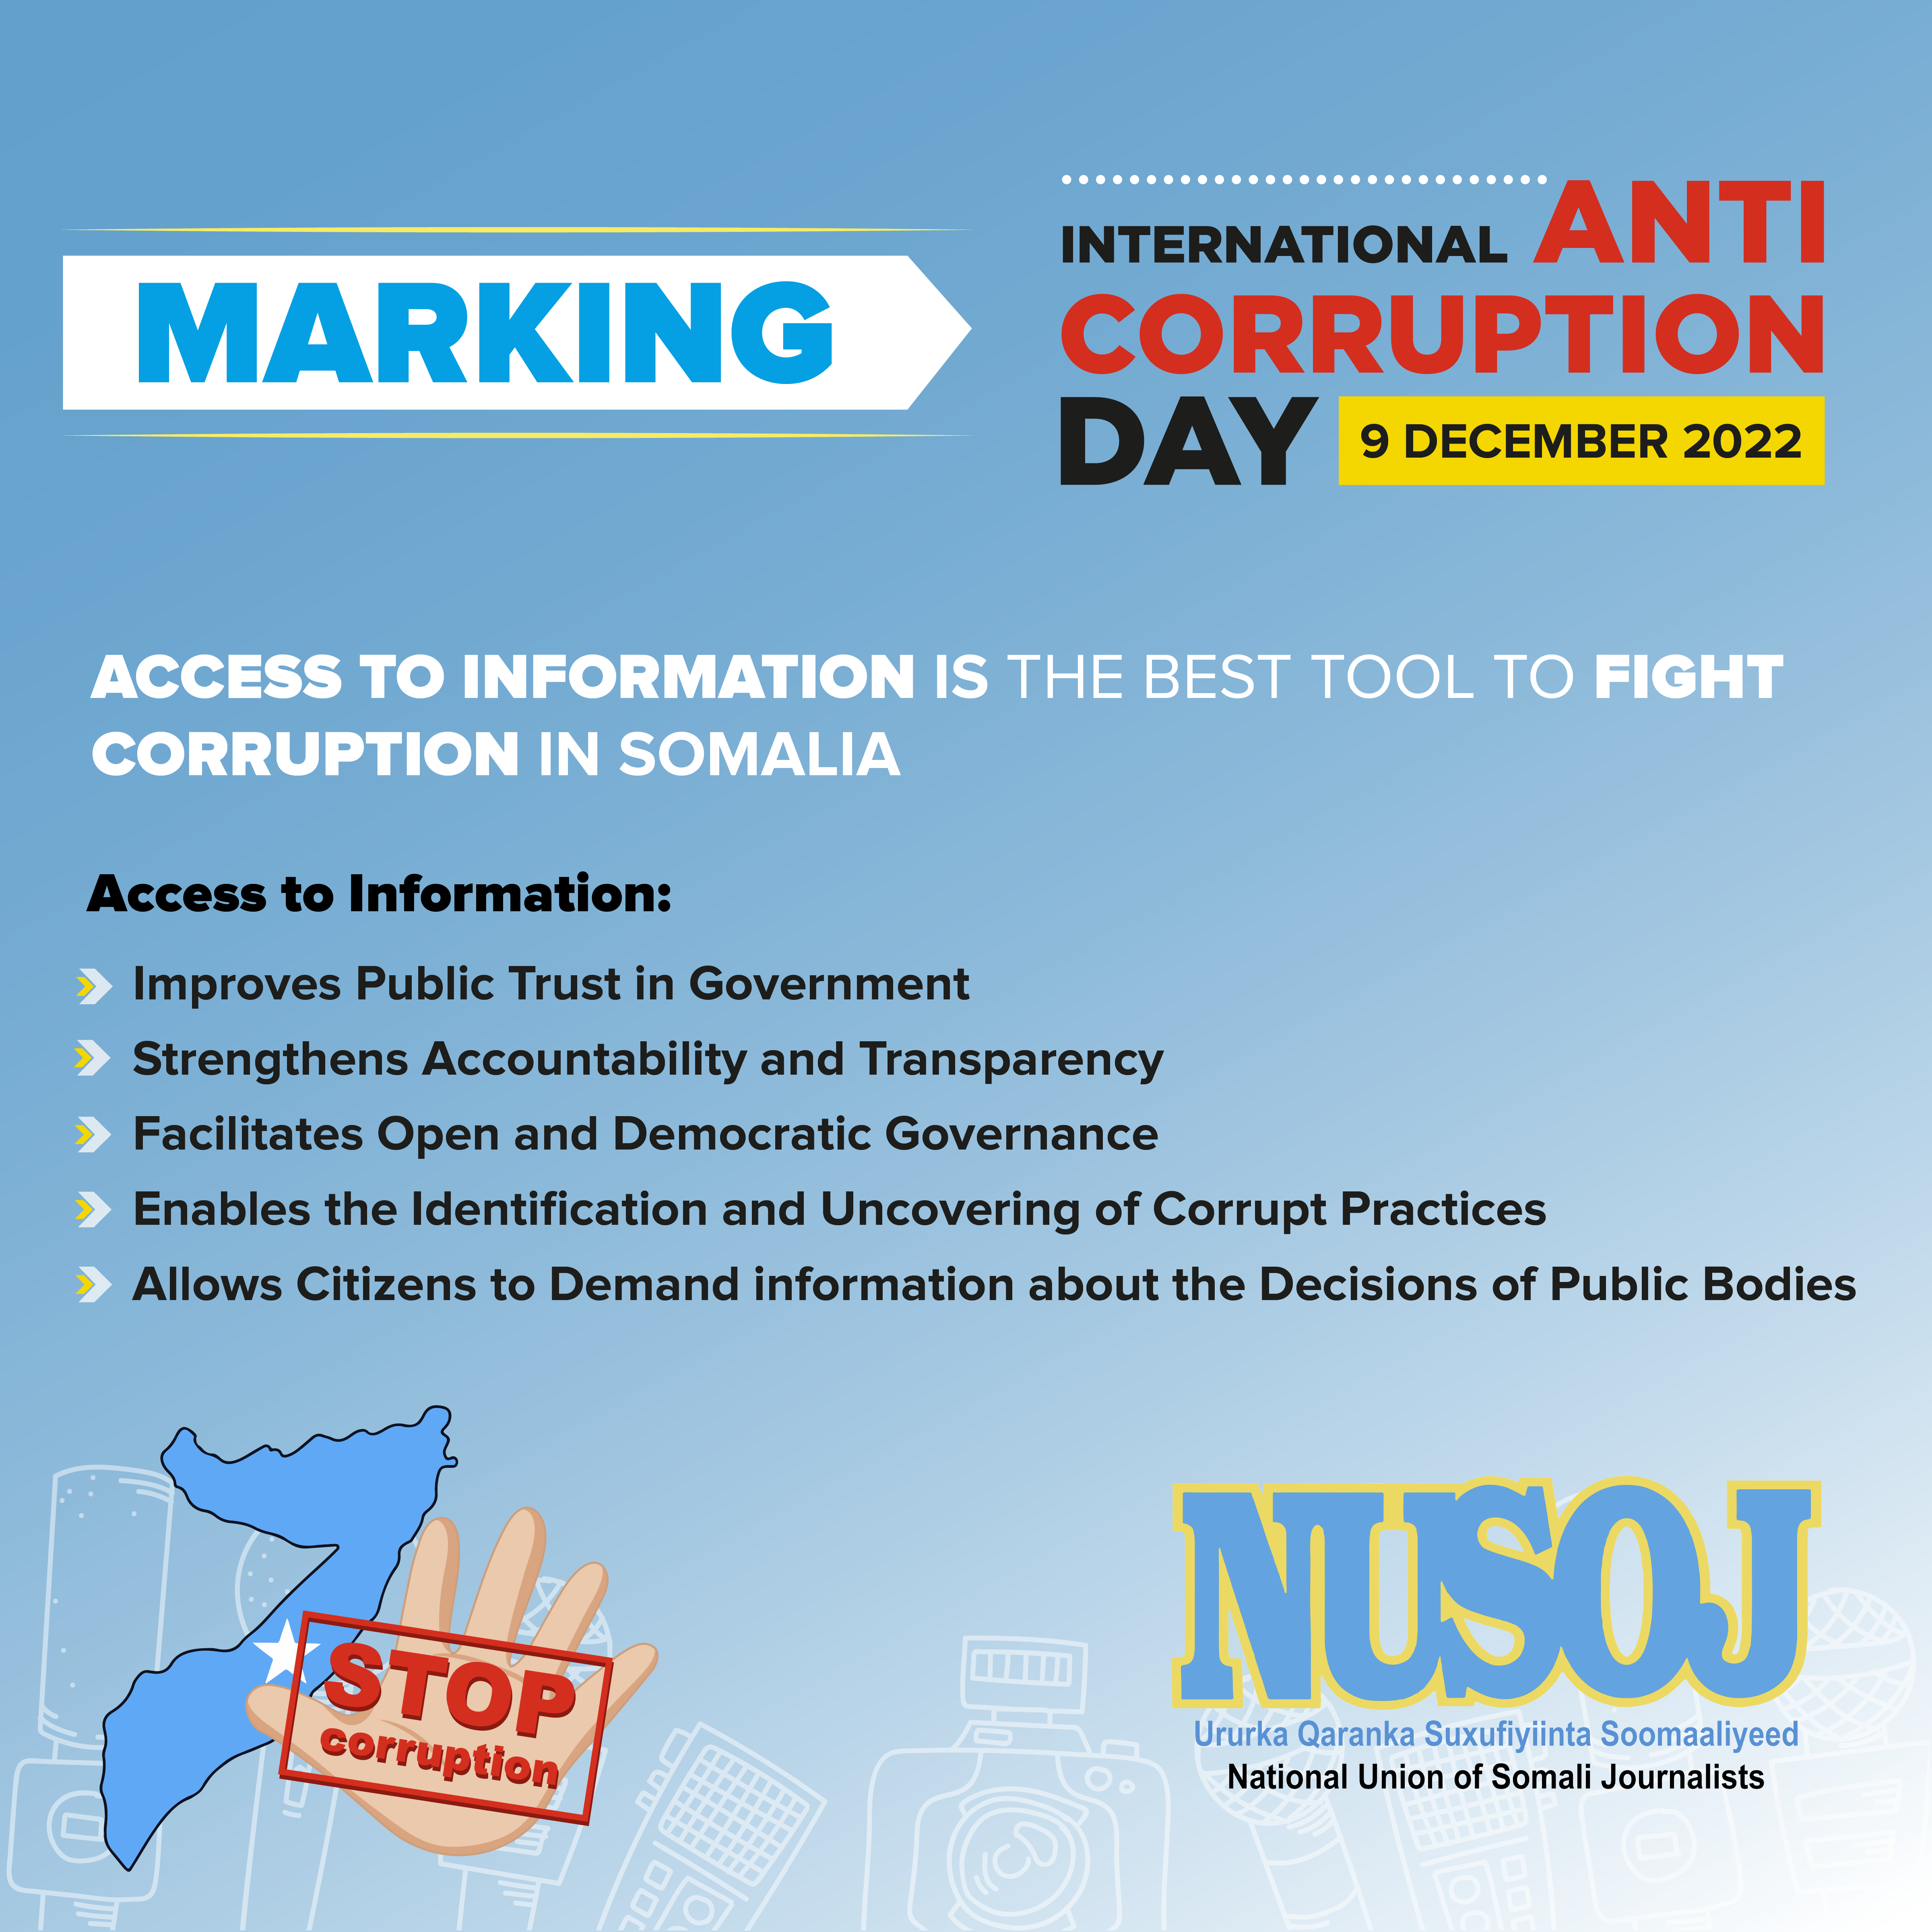 Access to Information is the Best Tool to Fight Corruption in Somalia